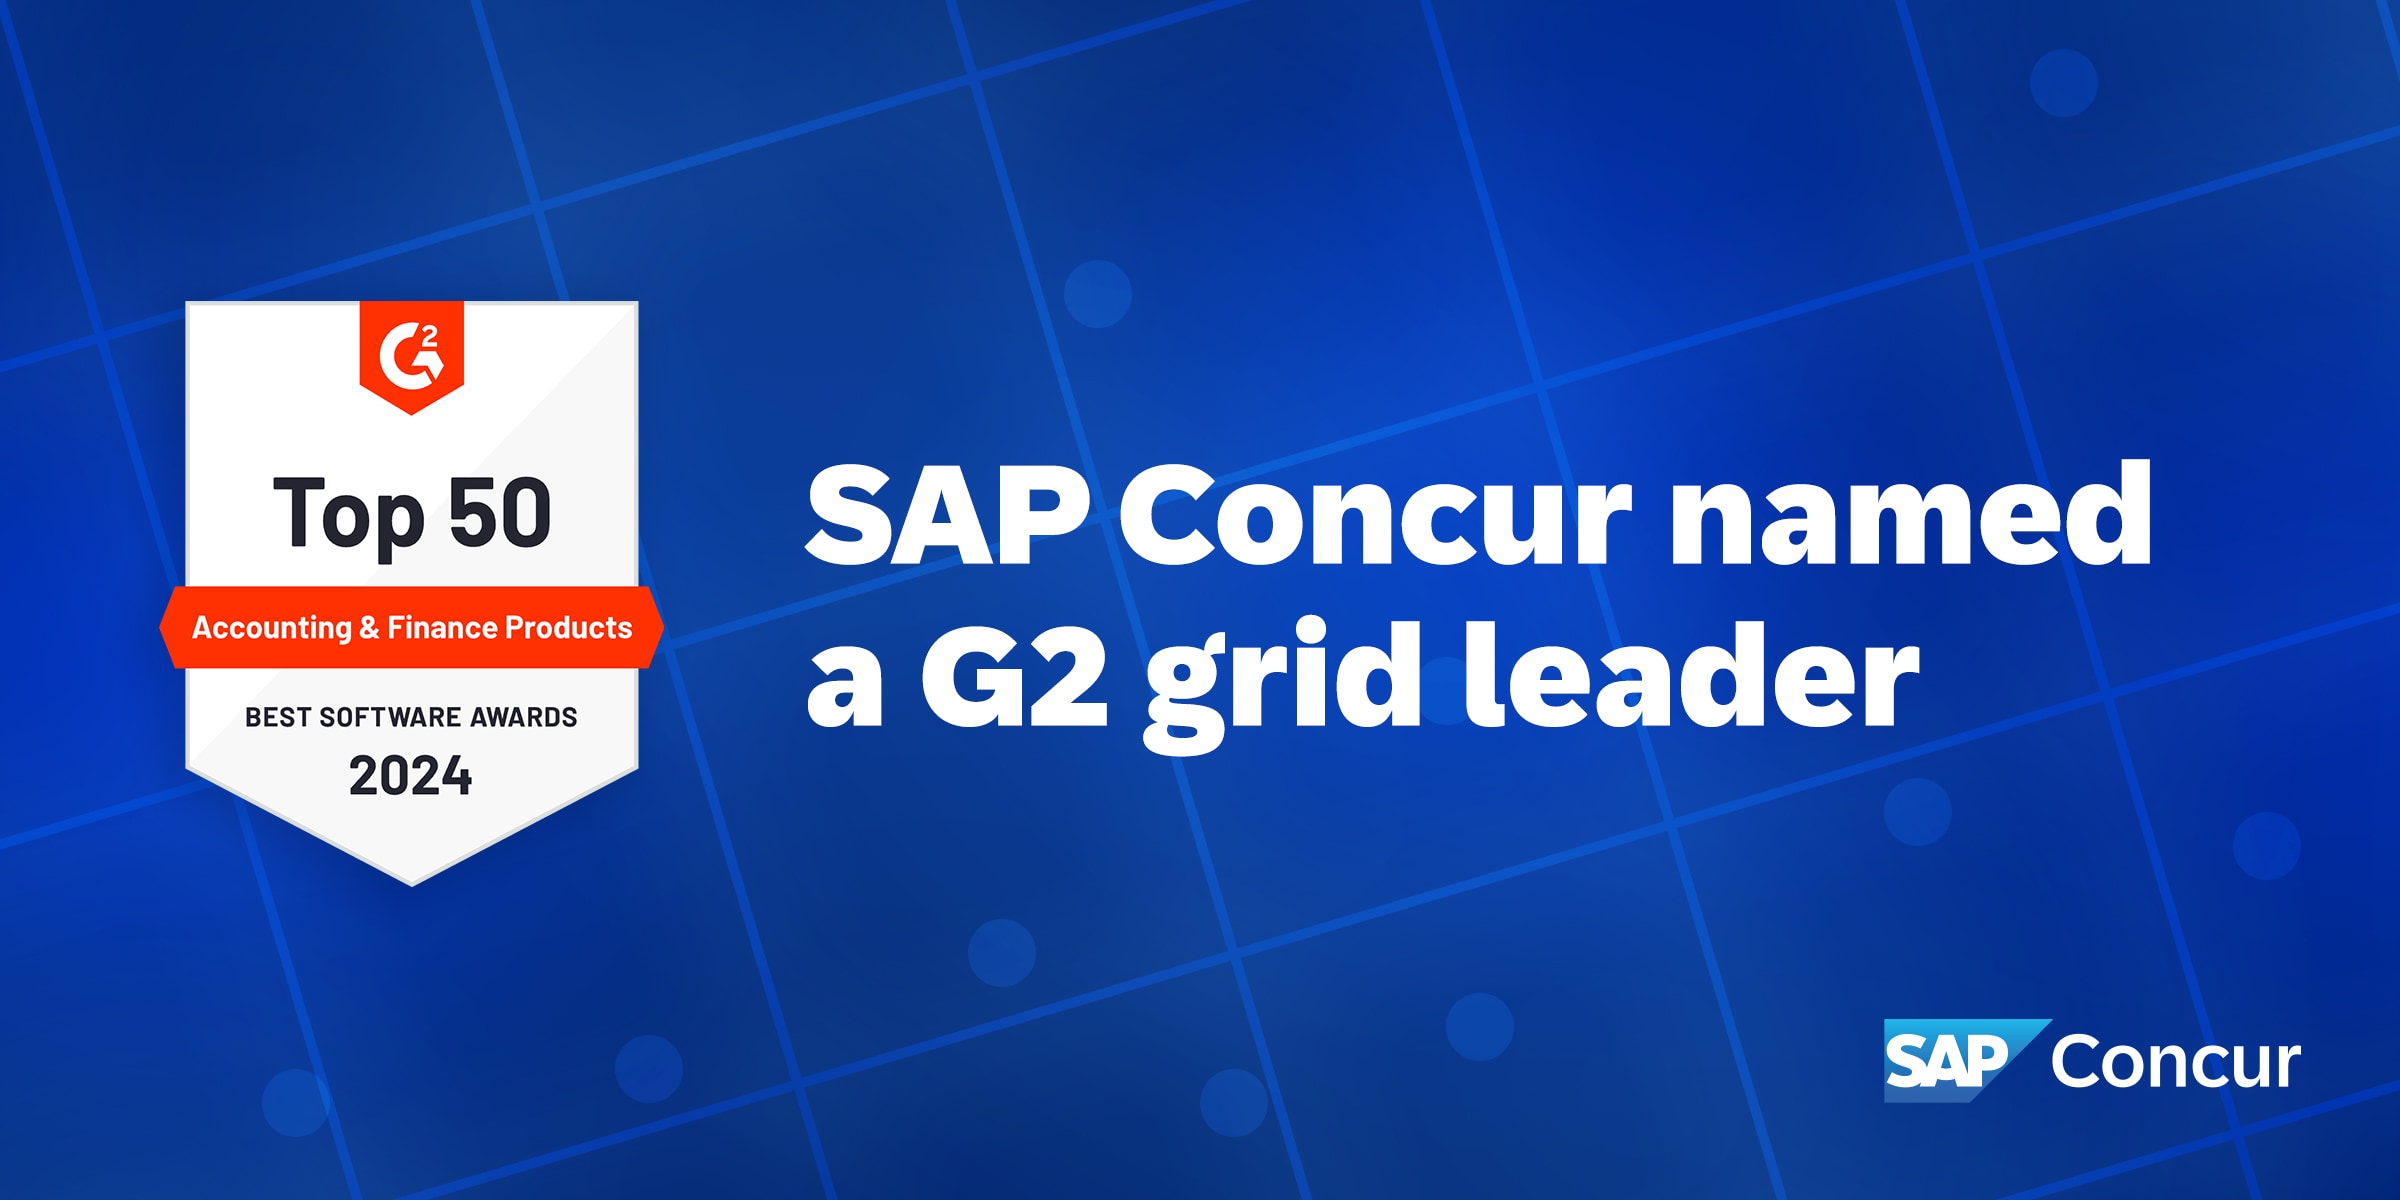 Illustration of SAP Concur against its competitors on a G2 grid